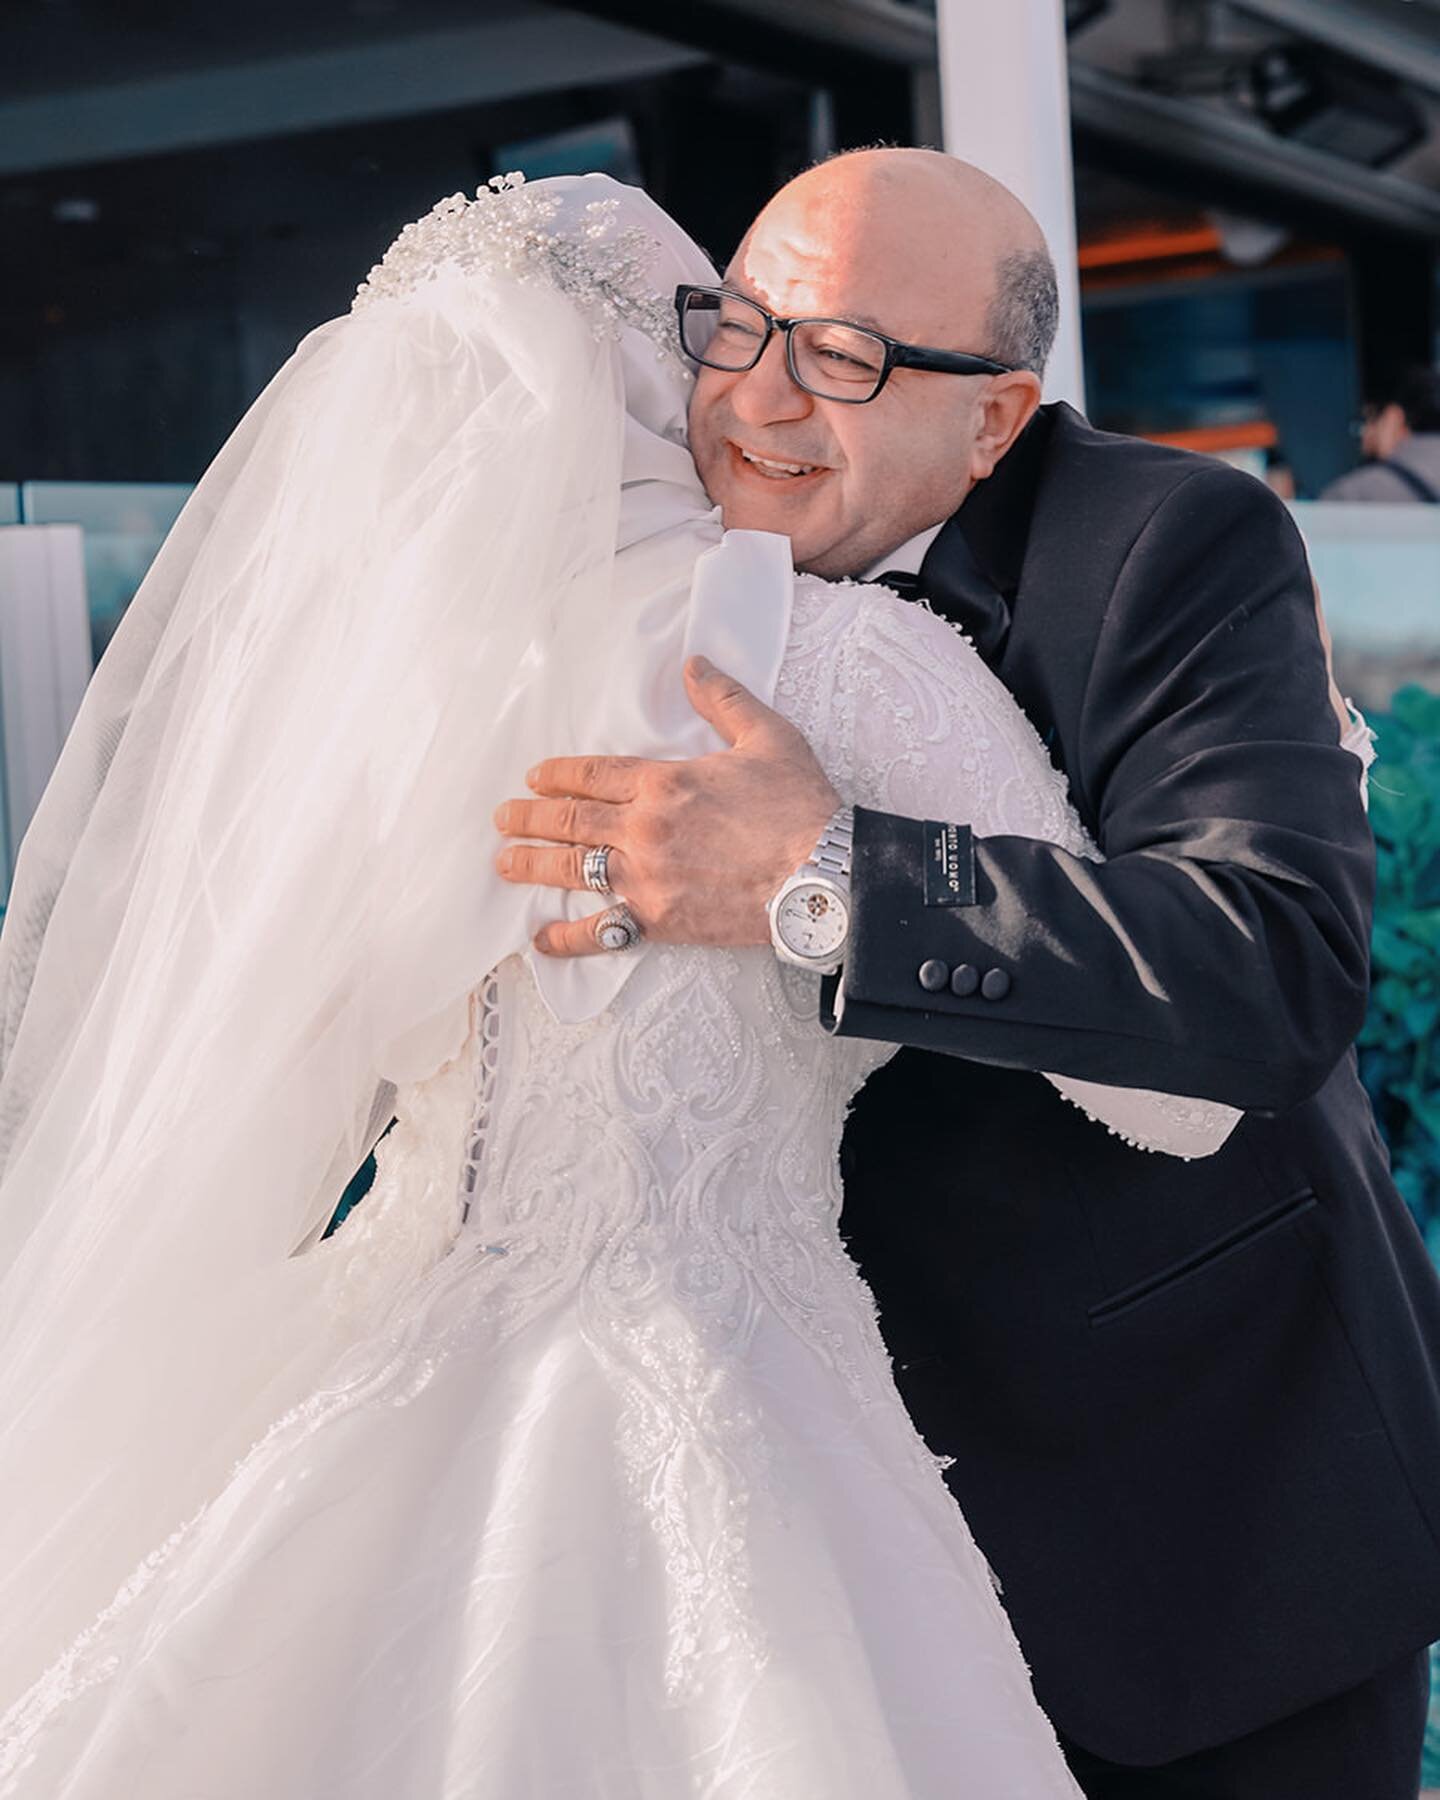 Dad appreciation post ! 

I always always ALWAYS cry when I see dad and bride doing first look and first dance. The happiness in the dad face looking at his princess is priceless and wonderful to witness. 

This was one of my favorite brides and her 